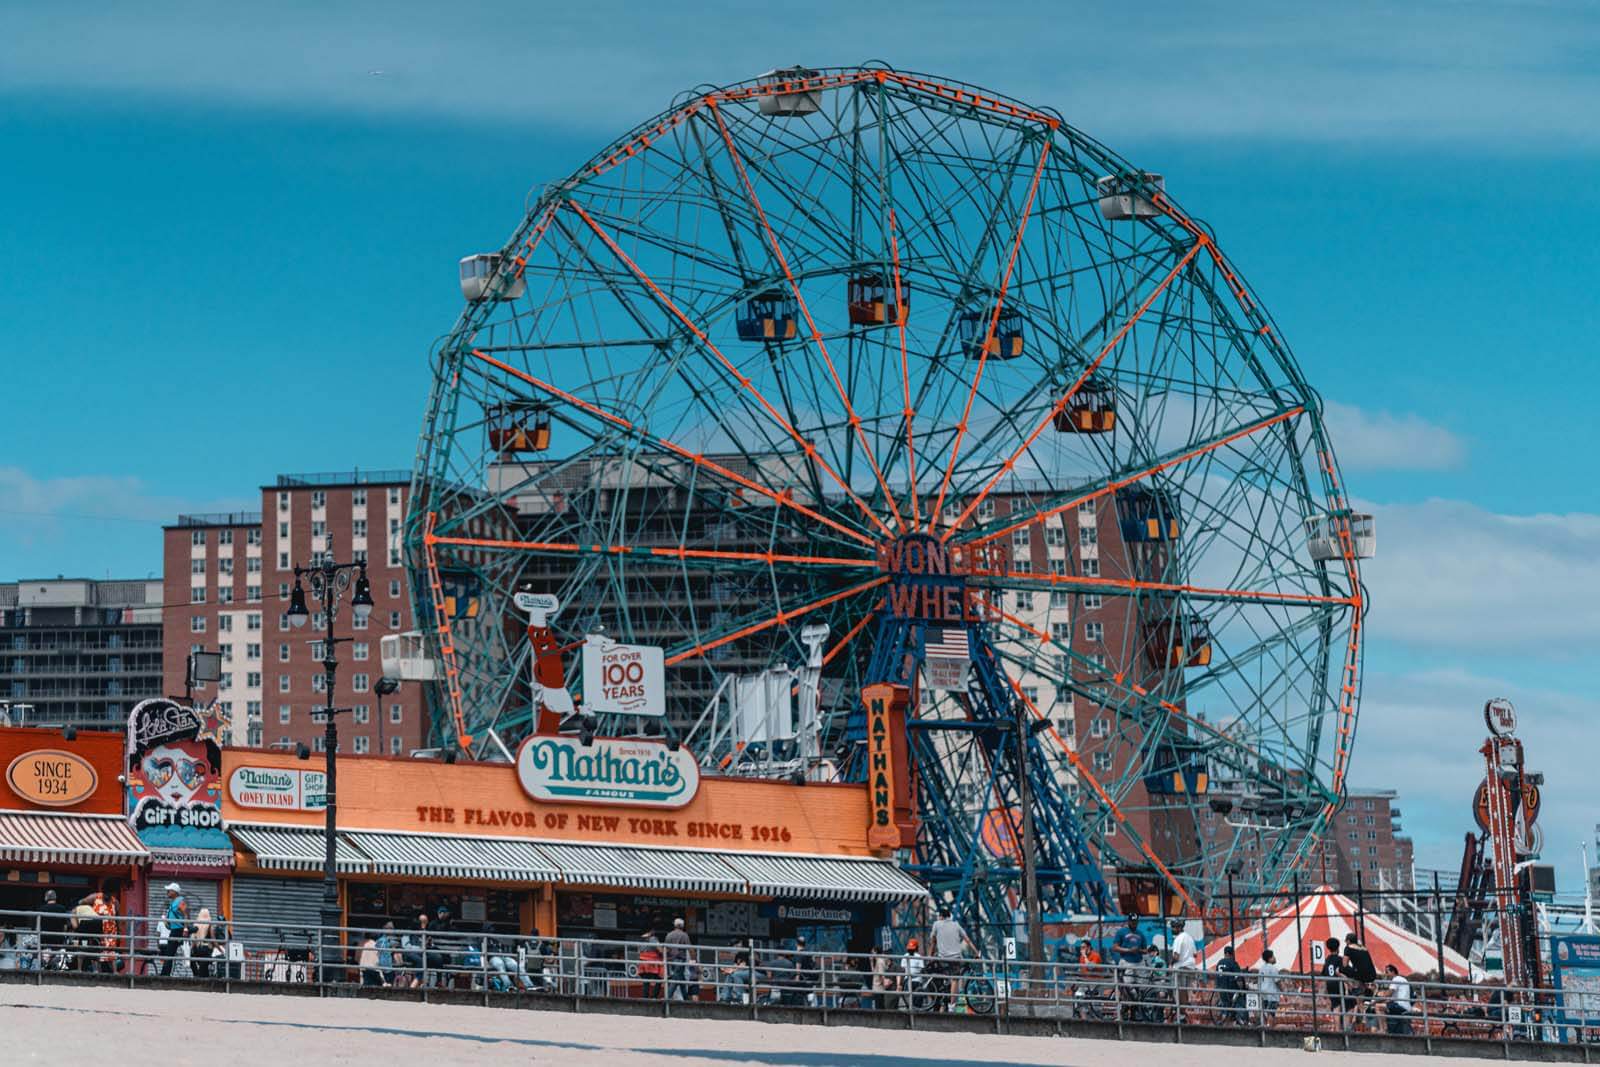 The Wonder Wheel and Nathans Famous on Rieggleman Boardwalk in Coney Island